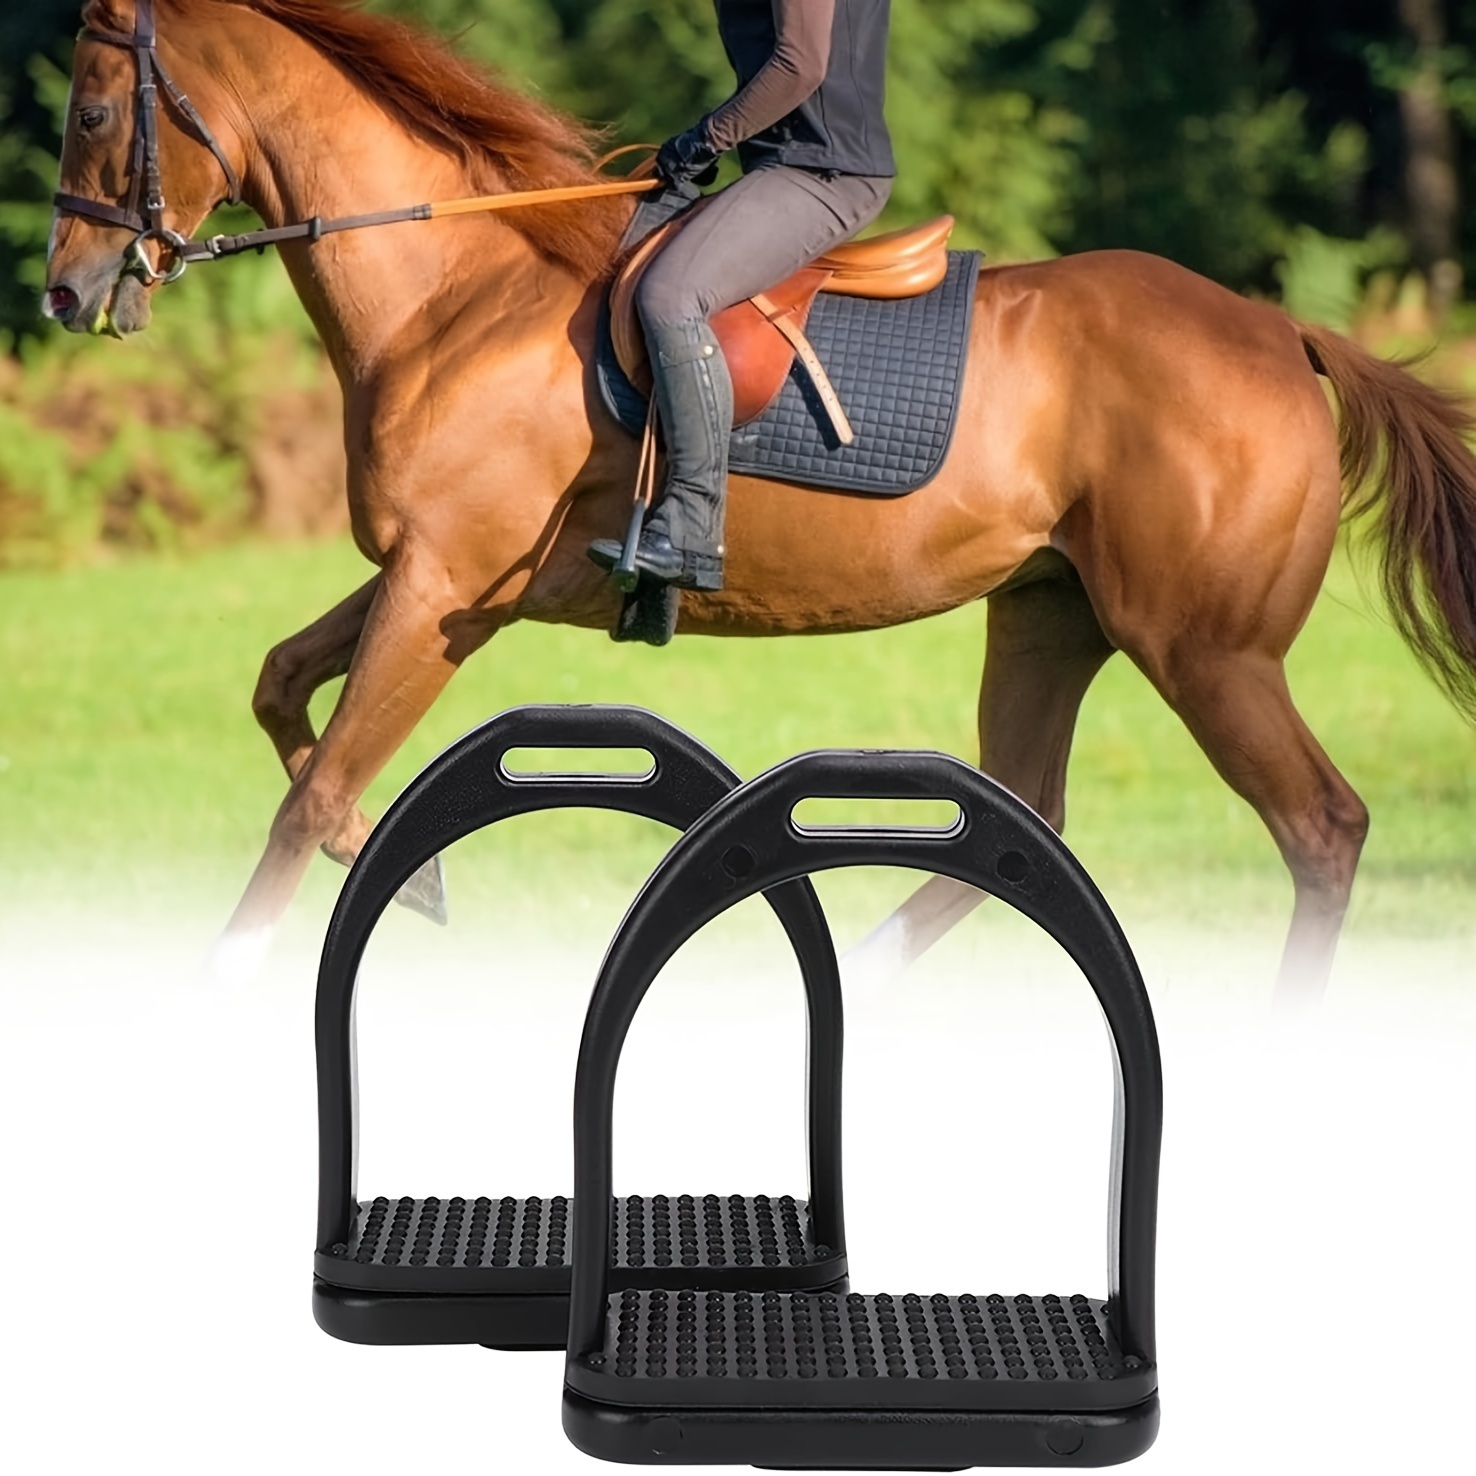 

1 Pair Of Stirrups, Horse Products, Black Rubber Padded Plastic Stirrups, Flex Abs Stirrups, Horse Accessories